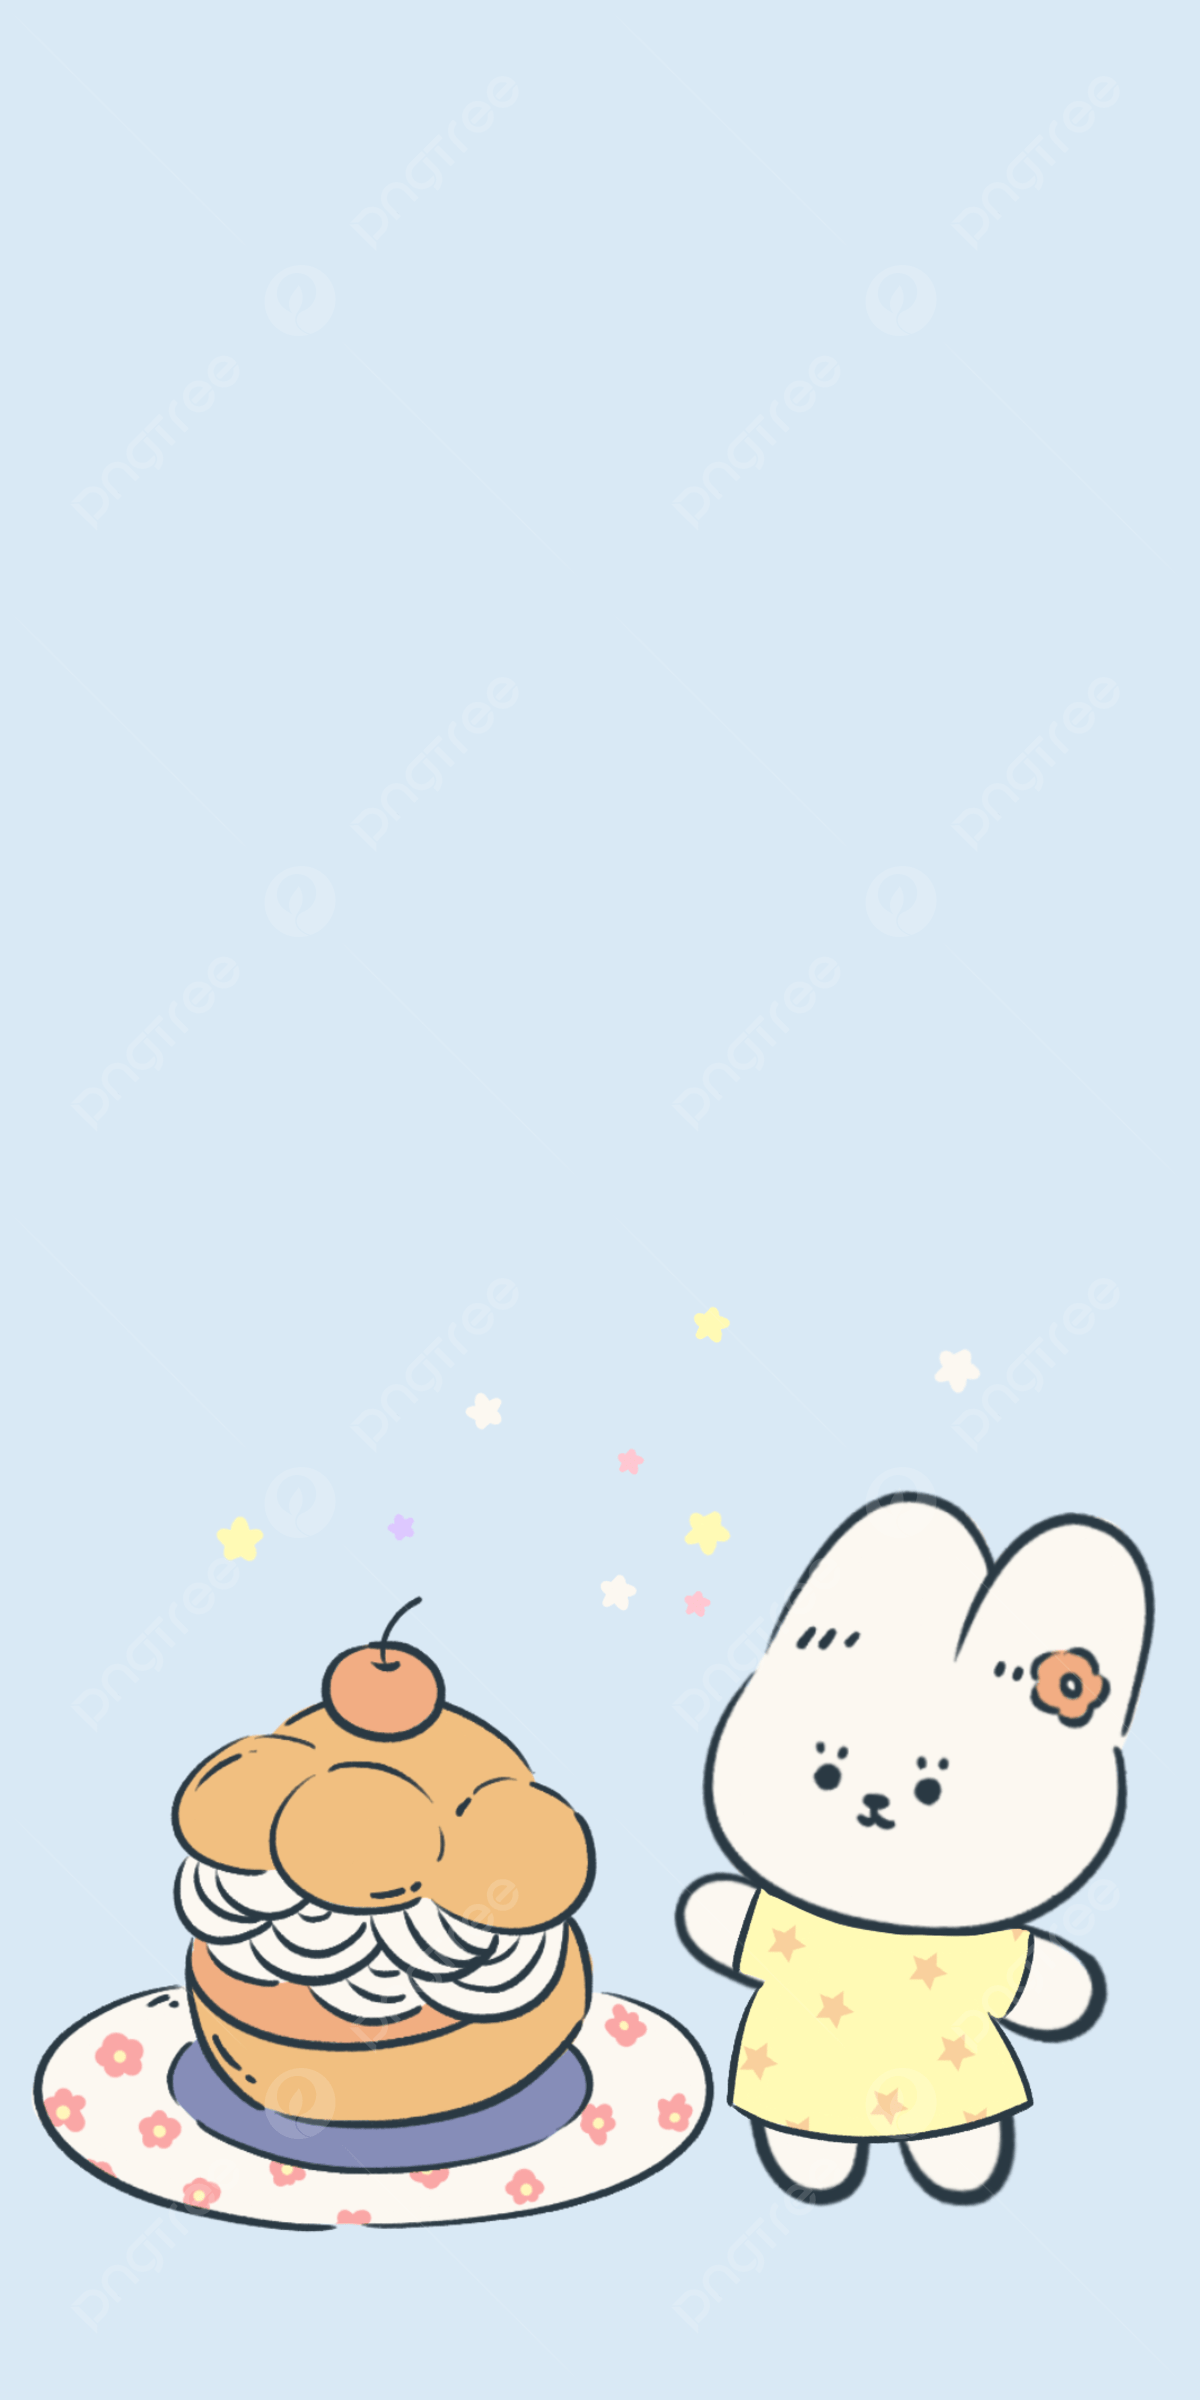 A cartoon bunny in a dress stands next to a large cupcake on a plate. - Cake